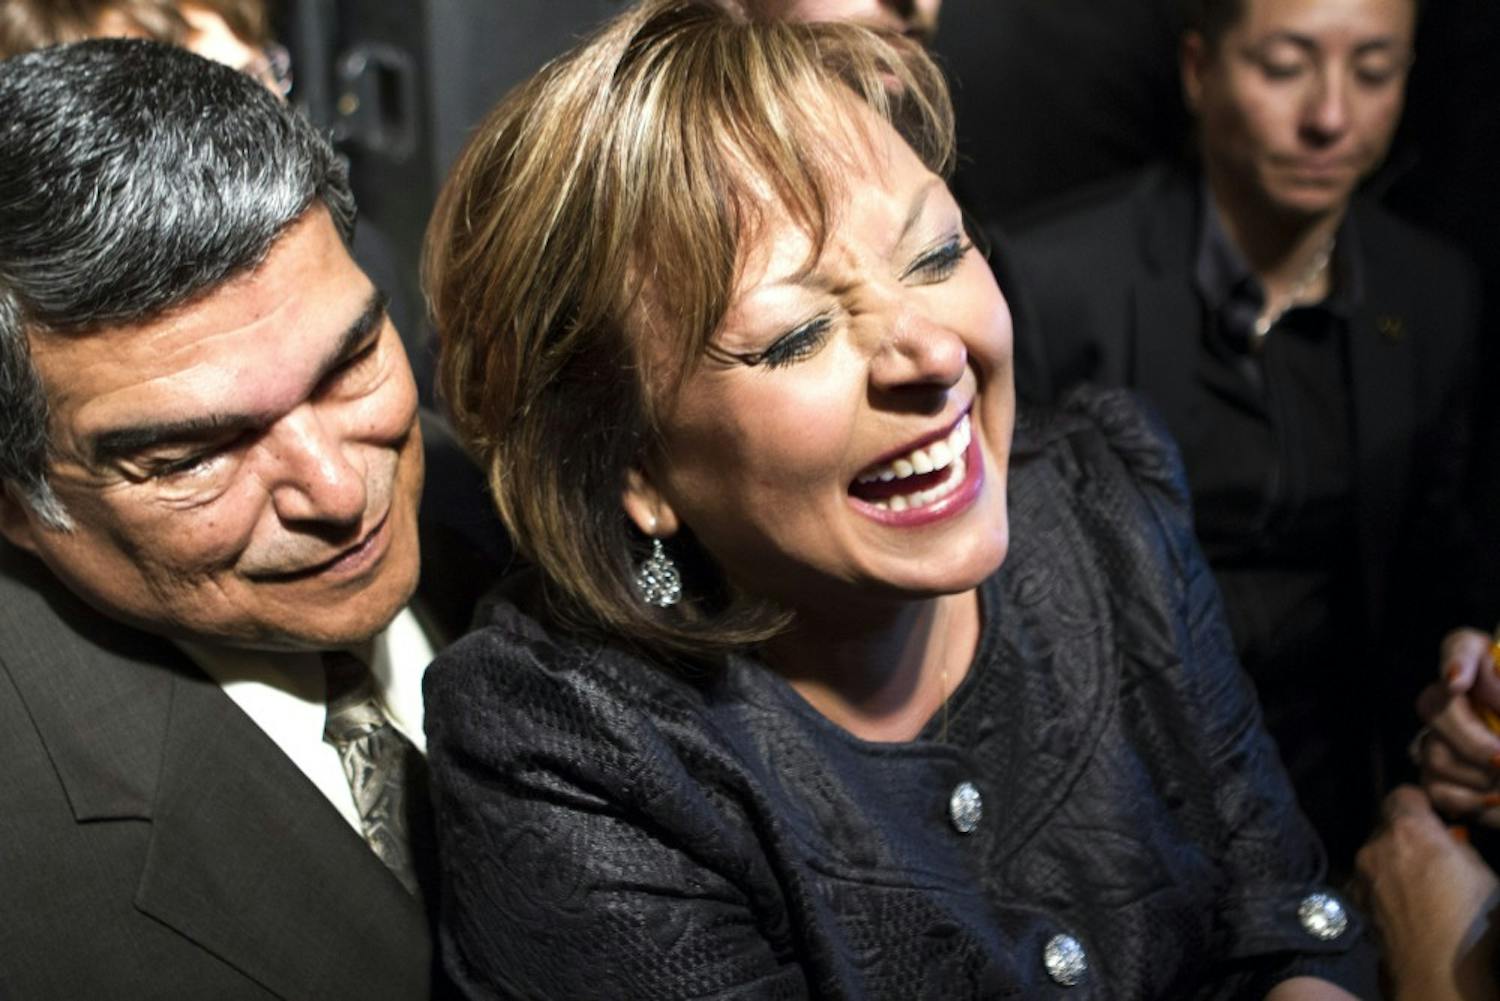 New Mexico governor Susana Martinez, center, greets supporters after her victory speech at the Albuquerque Marriott on Tuesday night. Martinez, a Republican, won re-election after defeating Democrat Gary King.